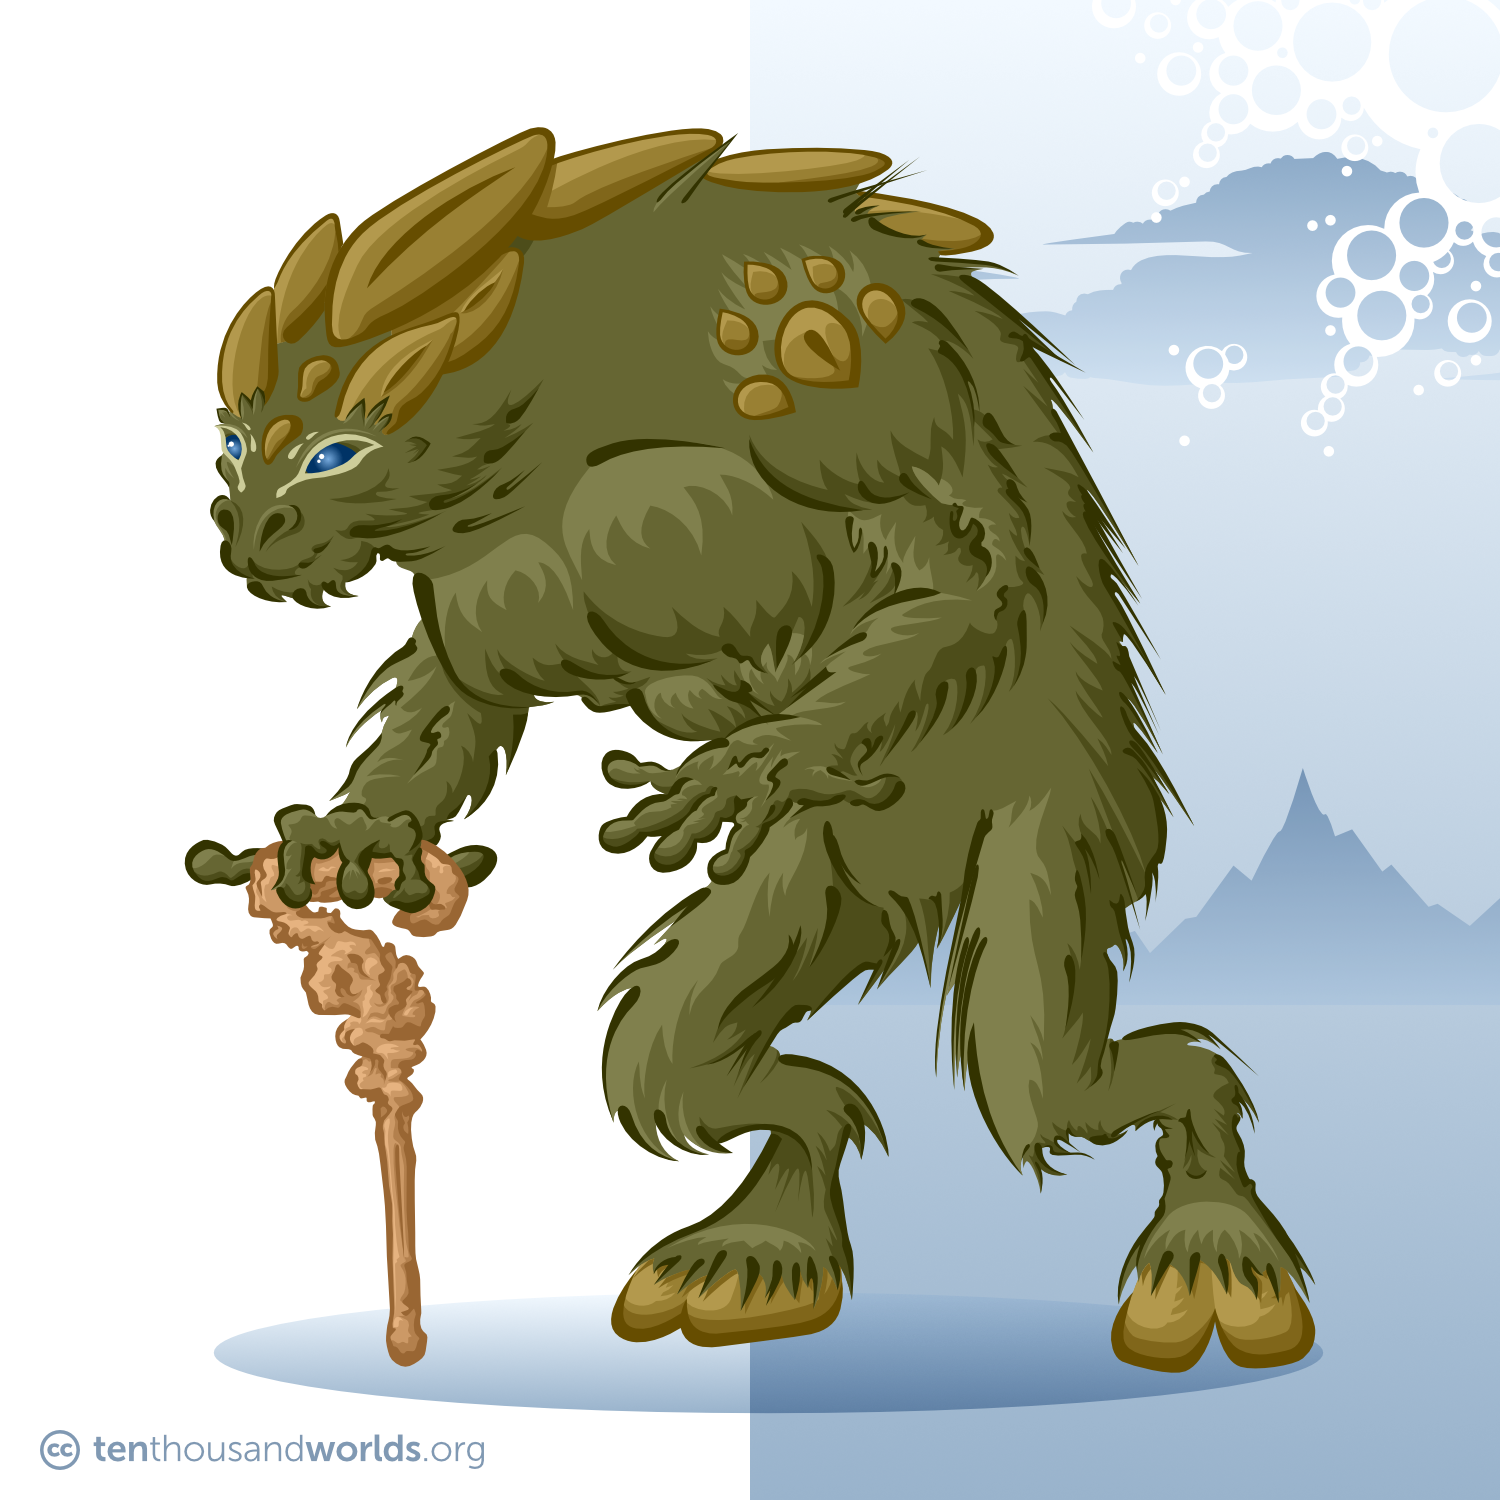 A furry, mossy-green humanoid being standing on pale brown cloven hooves and leaning on a gnarled wooden staff, with three fingers and two thumbs on each hand, a heavy chest, bowed back, and an almost feline face. Sandy-colored armored plates protect the head, upper back, and shoulders. Electric green facial markings highlight solid cobalt-blue eyes.